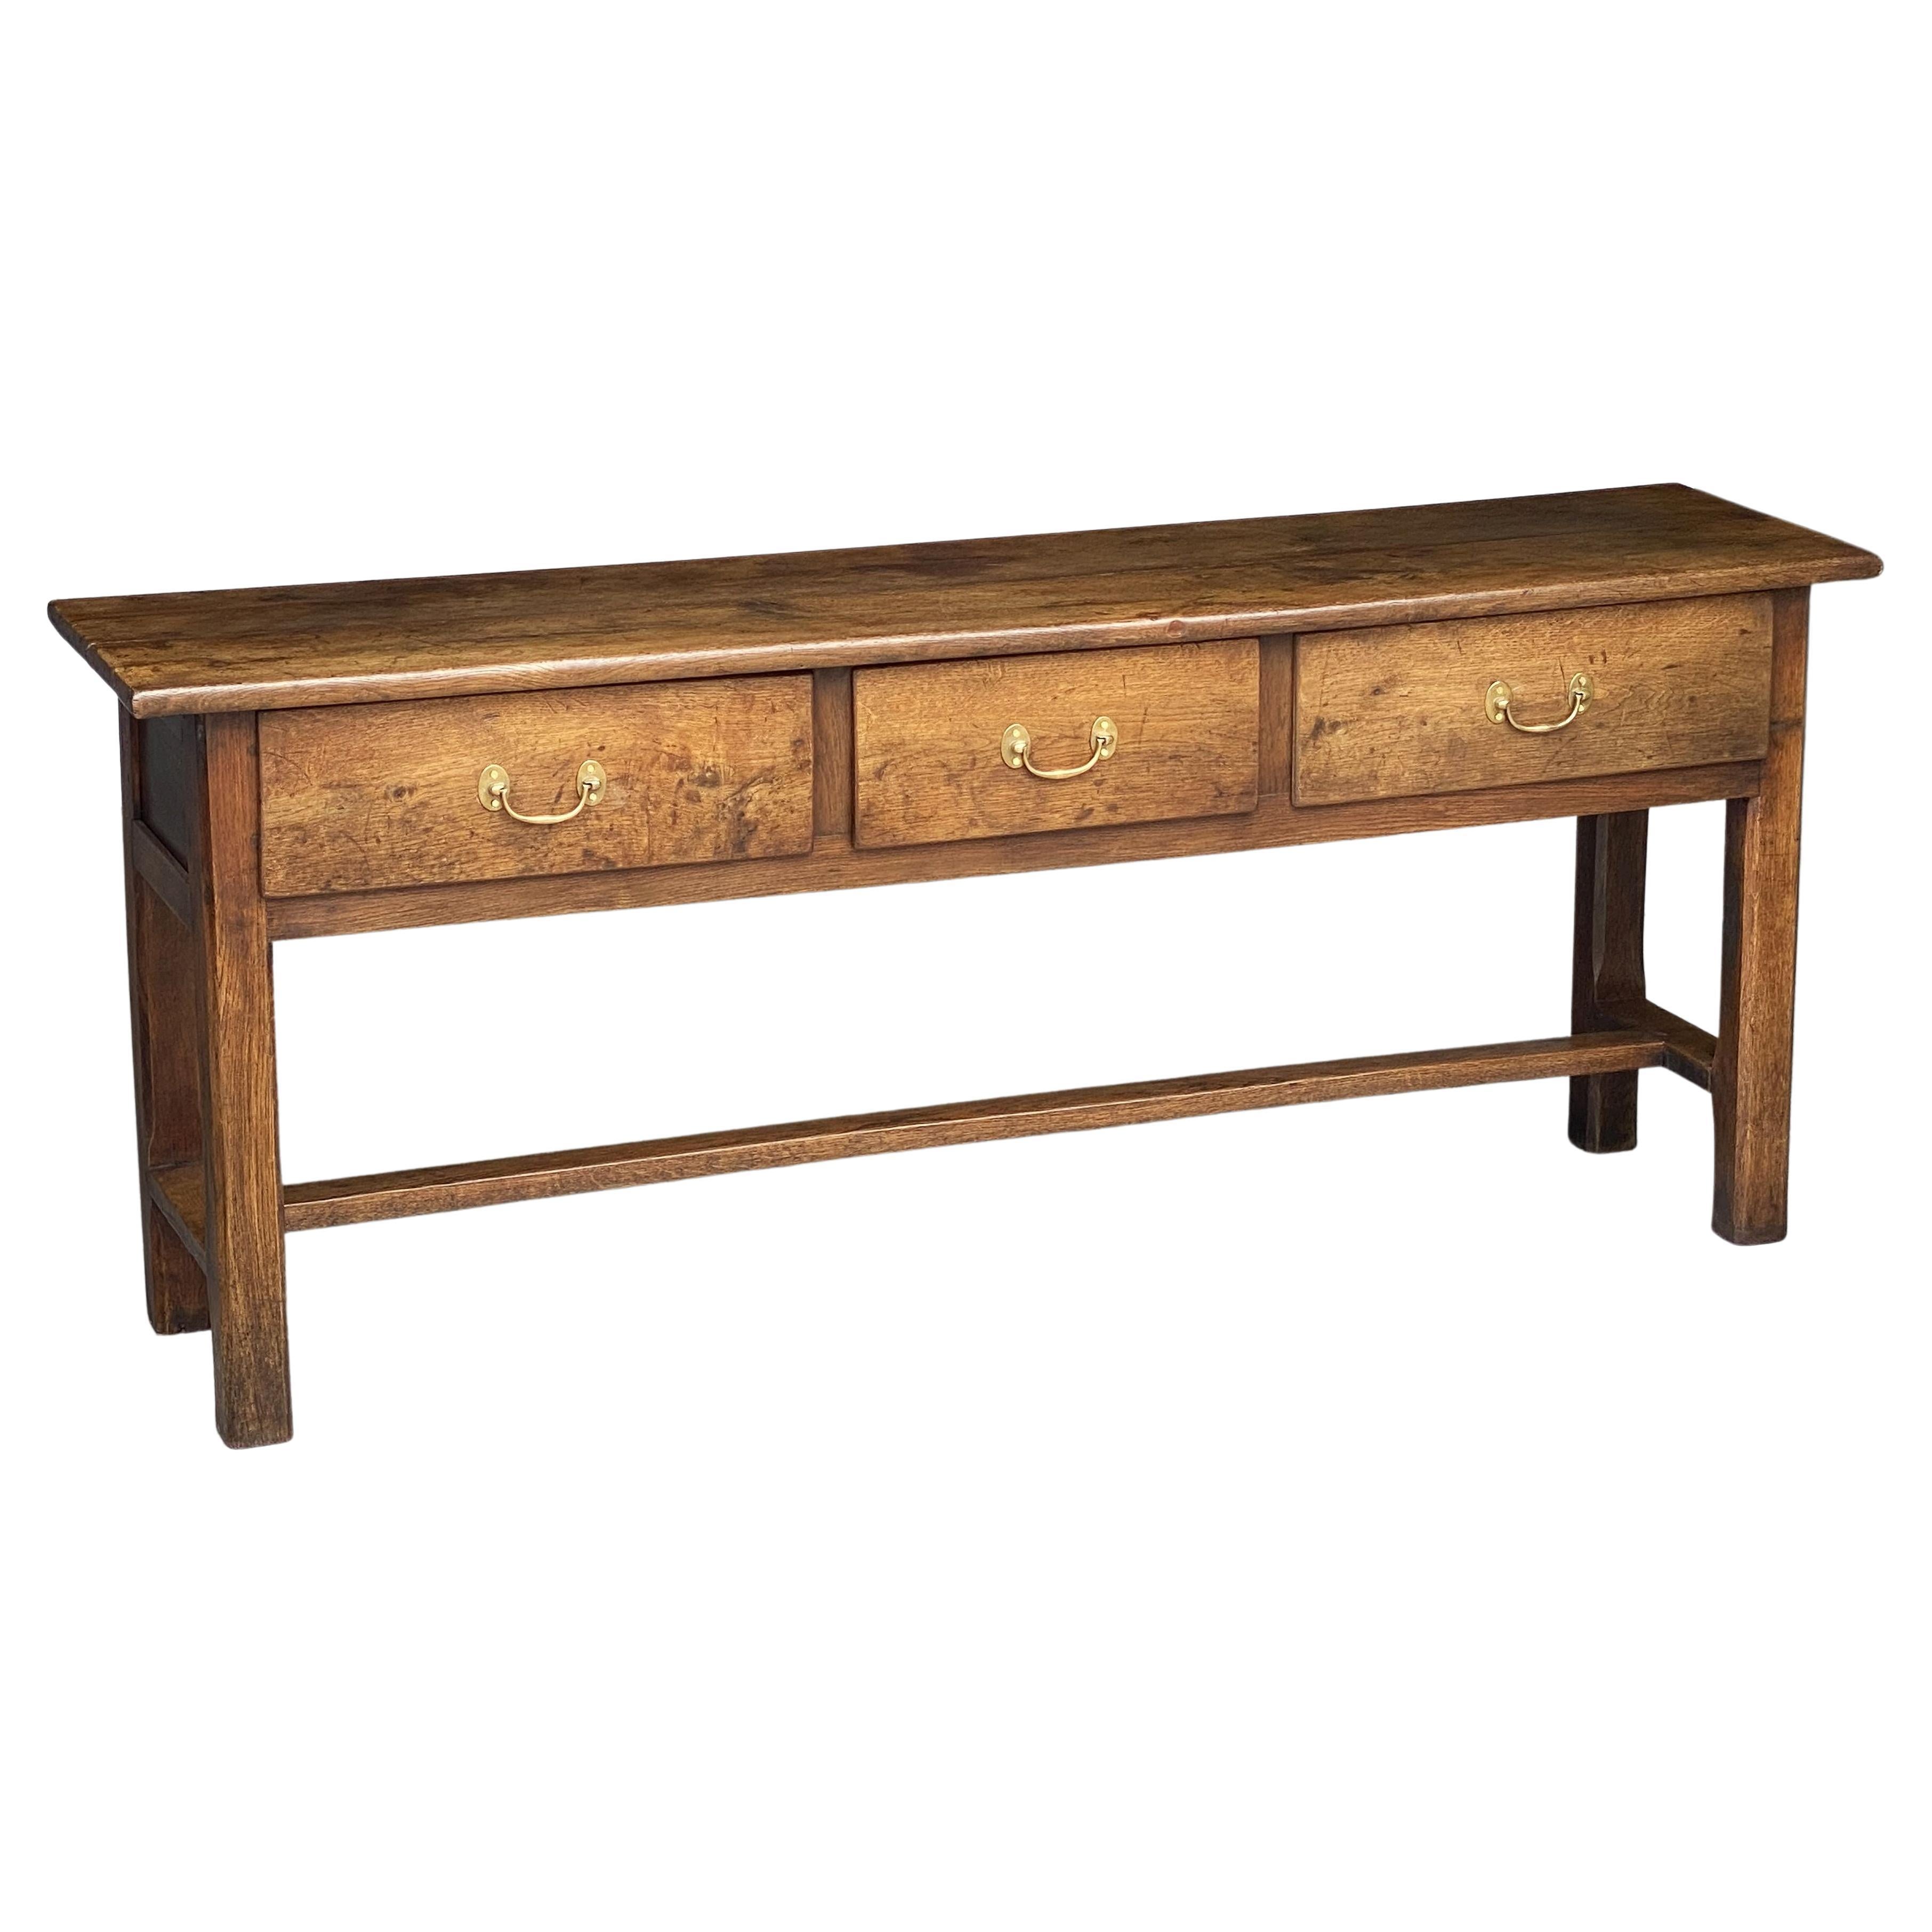 A handsome French console sideboard or serving table of chestnut wood featuring a plank top over a paneled frieze with three drawers, each with brass hardware pulls, and resting on a chamfered leg stretcher base.